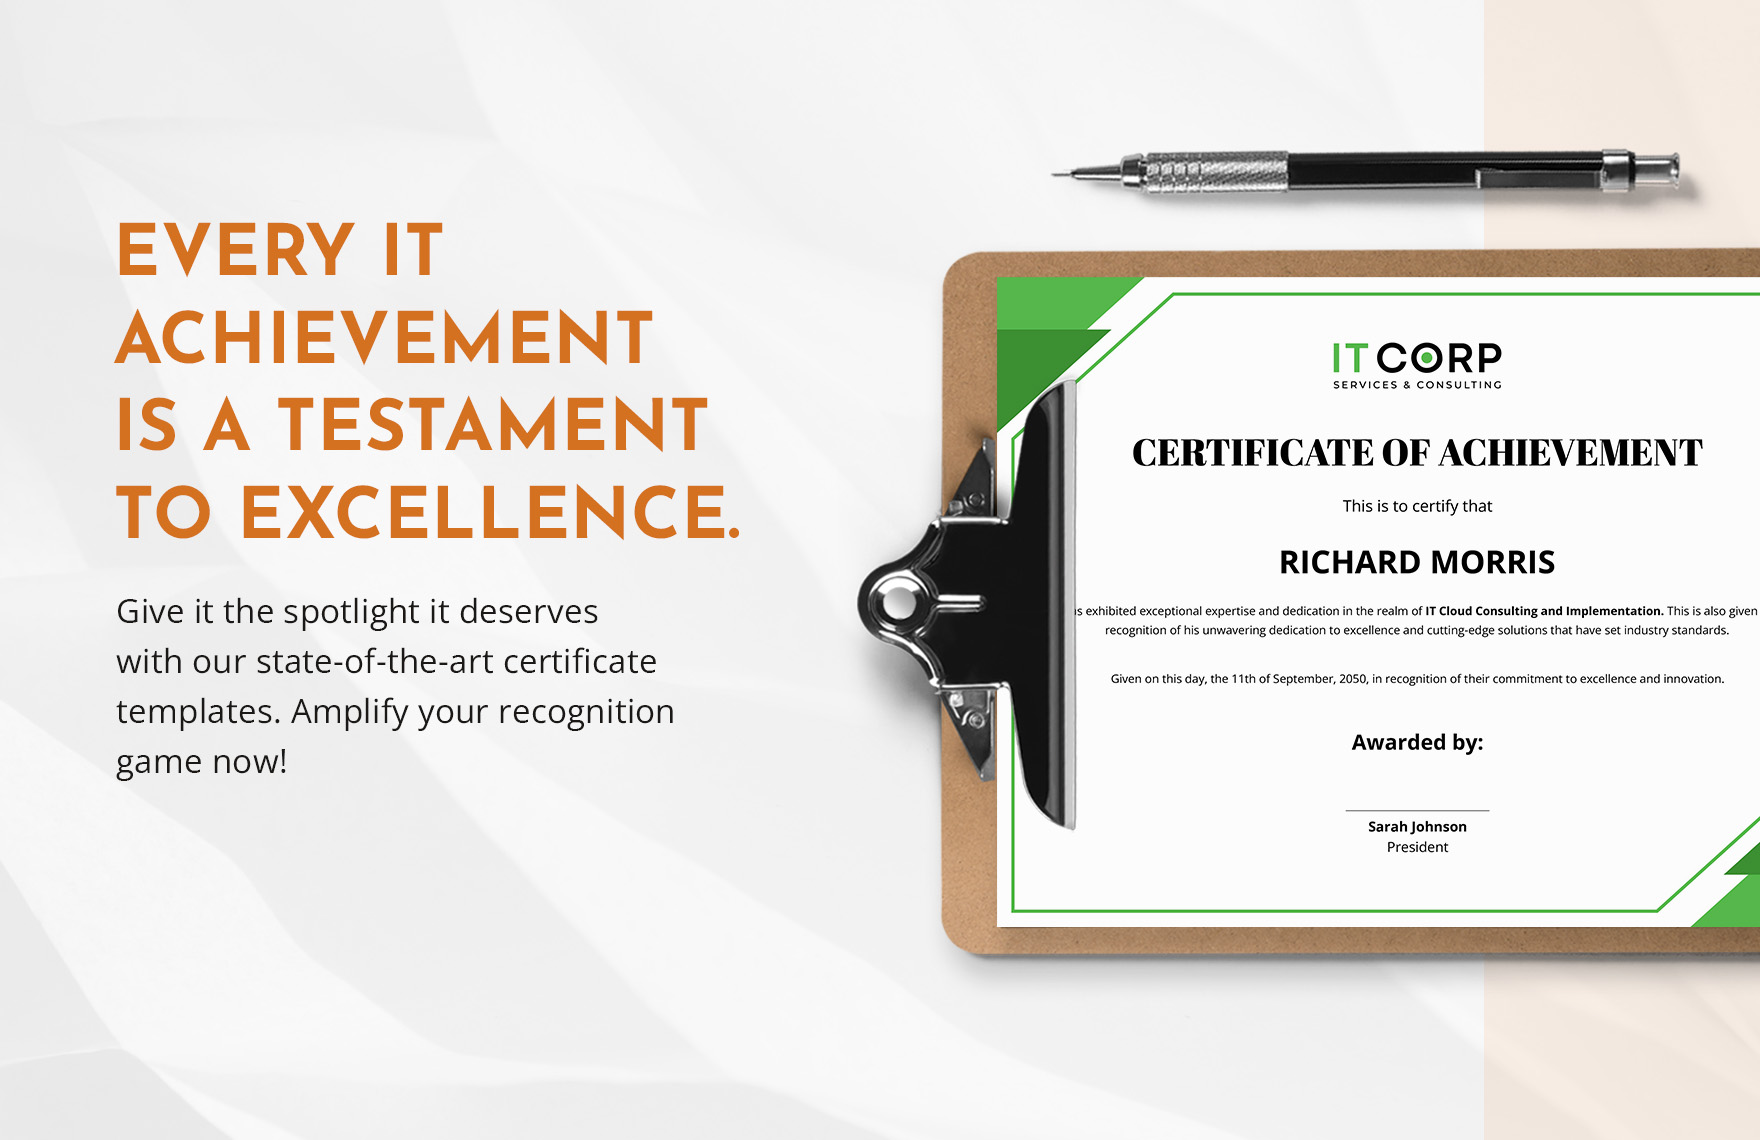 IT Cloud Consulting & Implementation Certificate Template